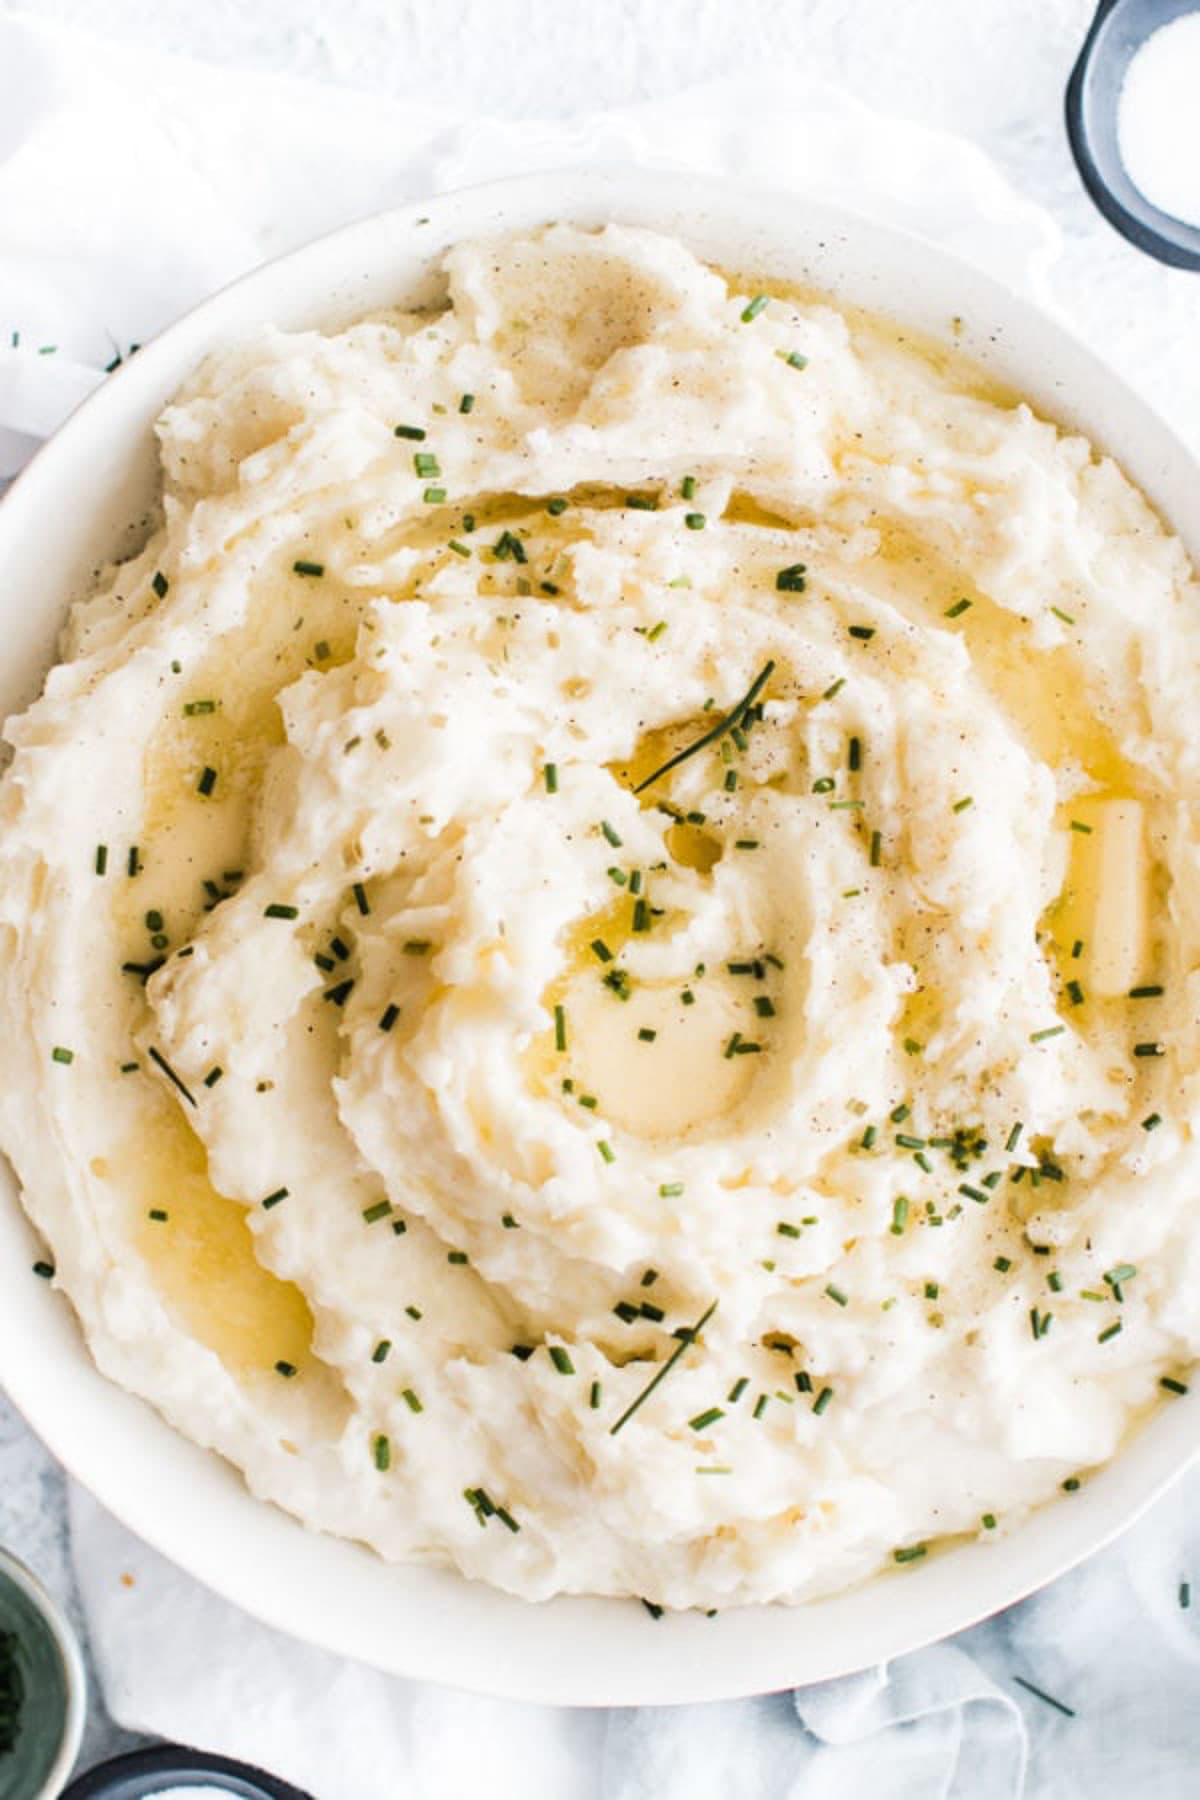 Pressure cooker mashed potatoes in a white bowl topped with chives.